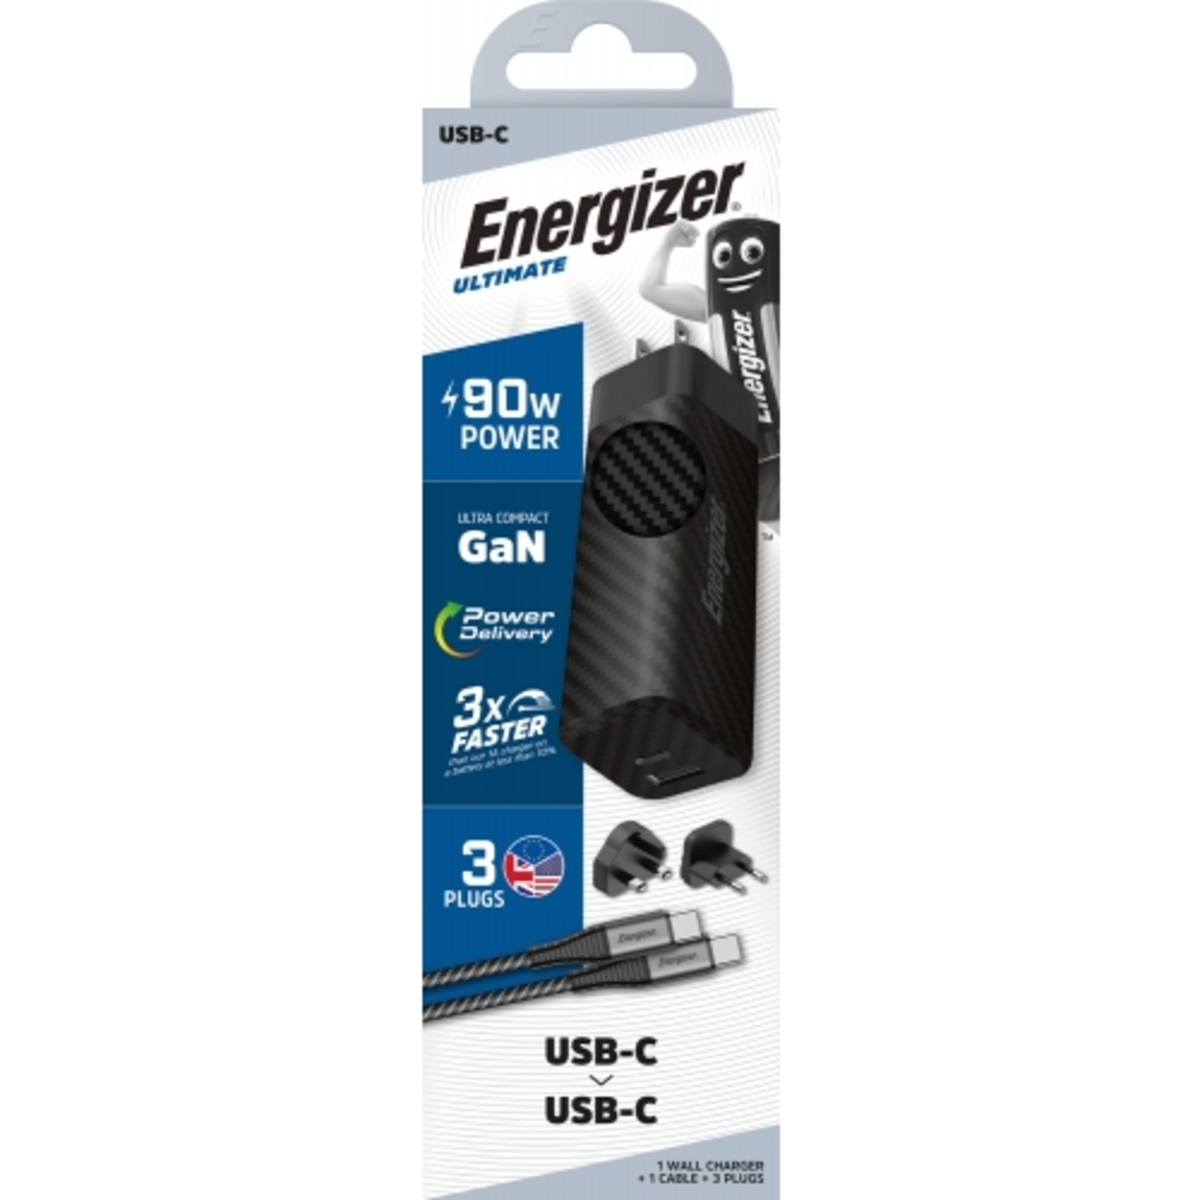 Energizer Ultimate Power Delivery Charger - 90W - EU / UK / US